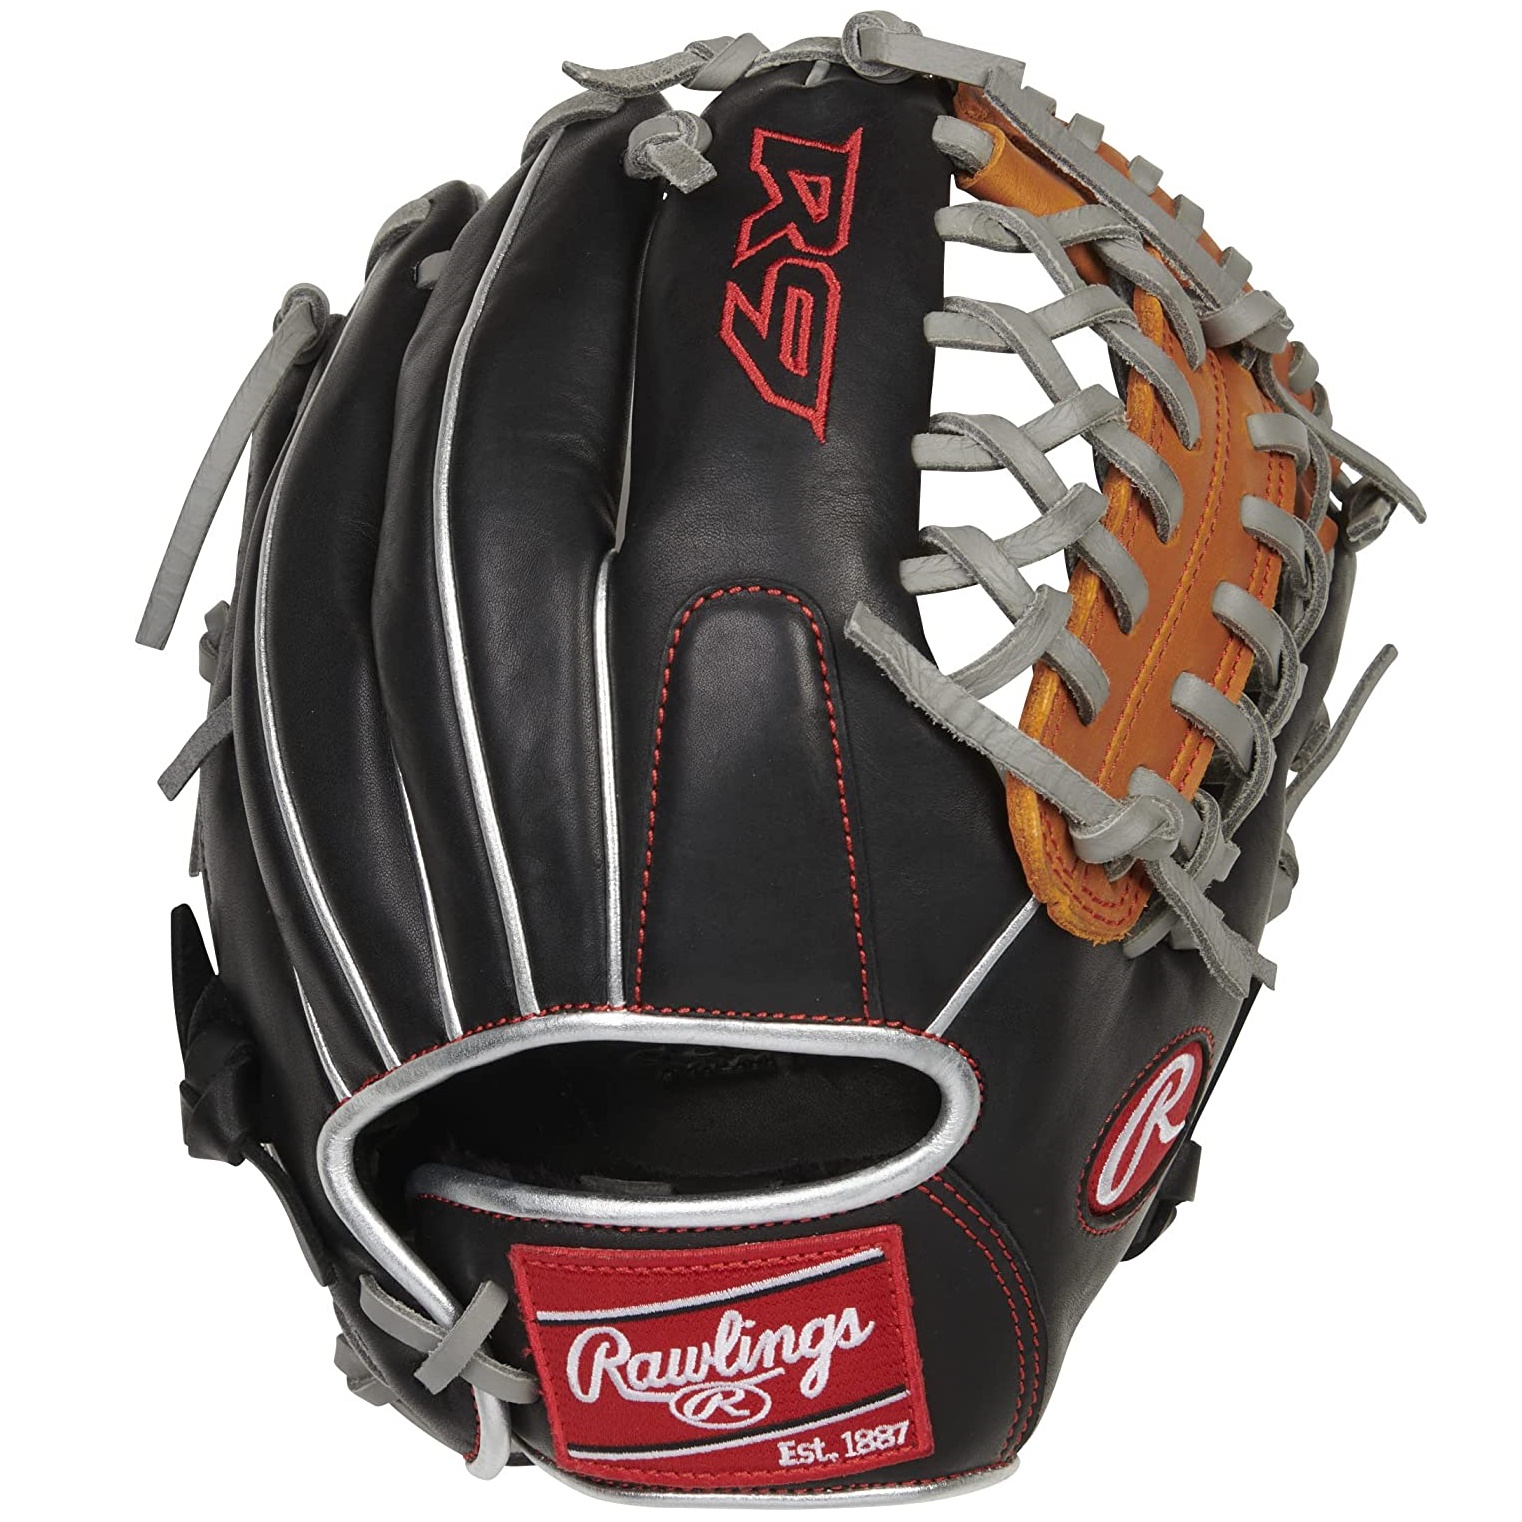 rawlings-r9-contour-baseball-glove-11-5-inch-modified-trap-eze-web-right-hand-throw R9115U-4BT-RightHandThrow Rawlings  Introducing the Rawlings R9-115U Contour Fit Baseball Glove designed to provide